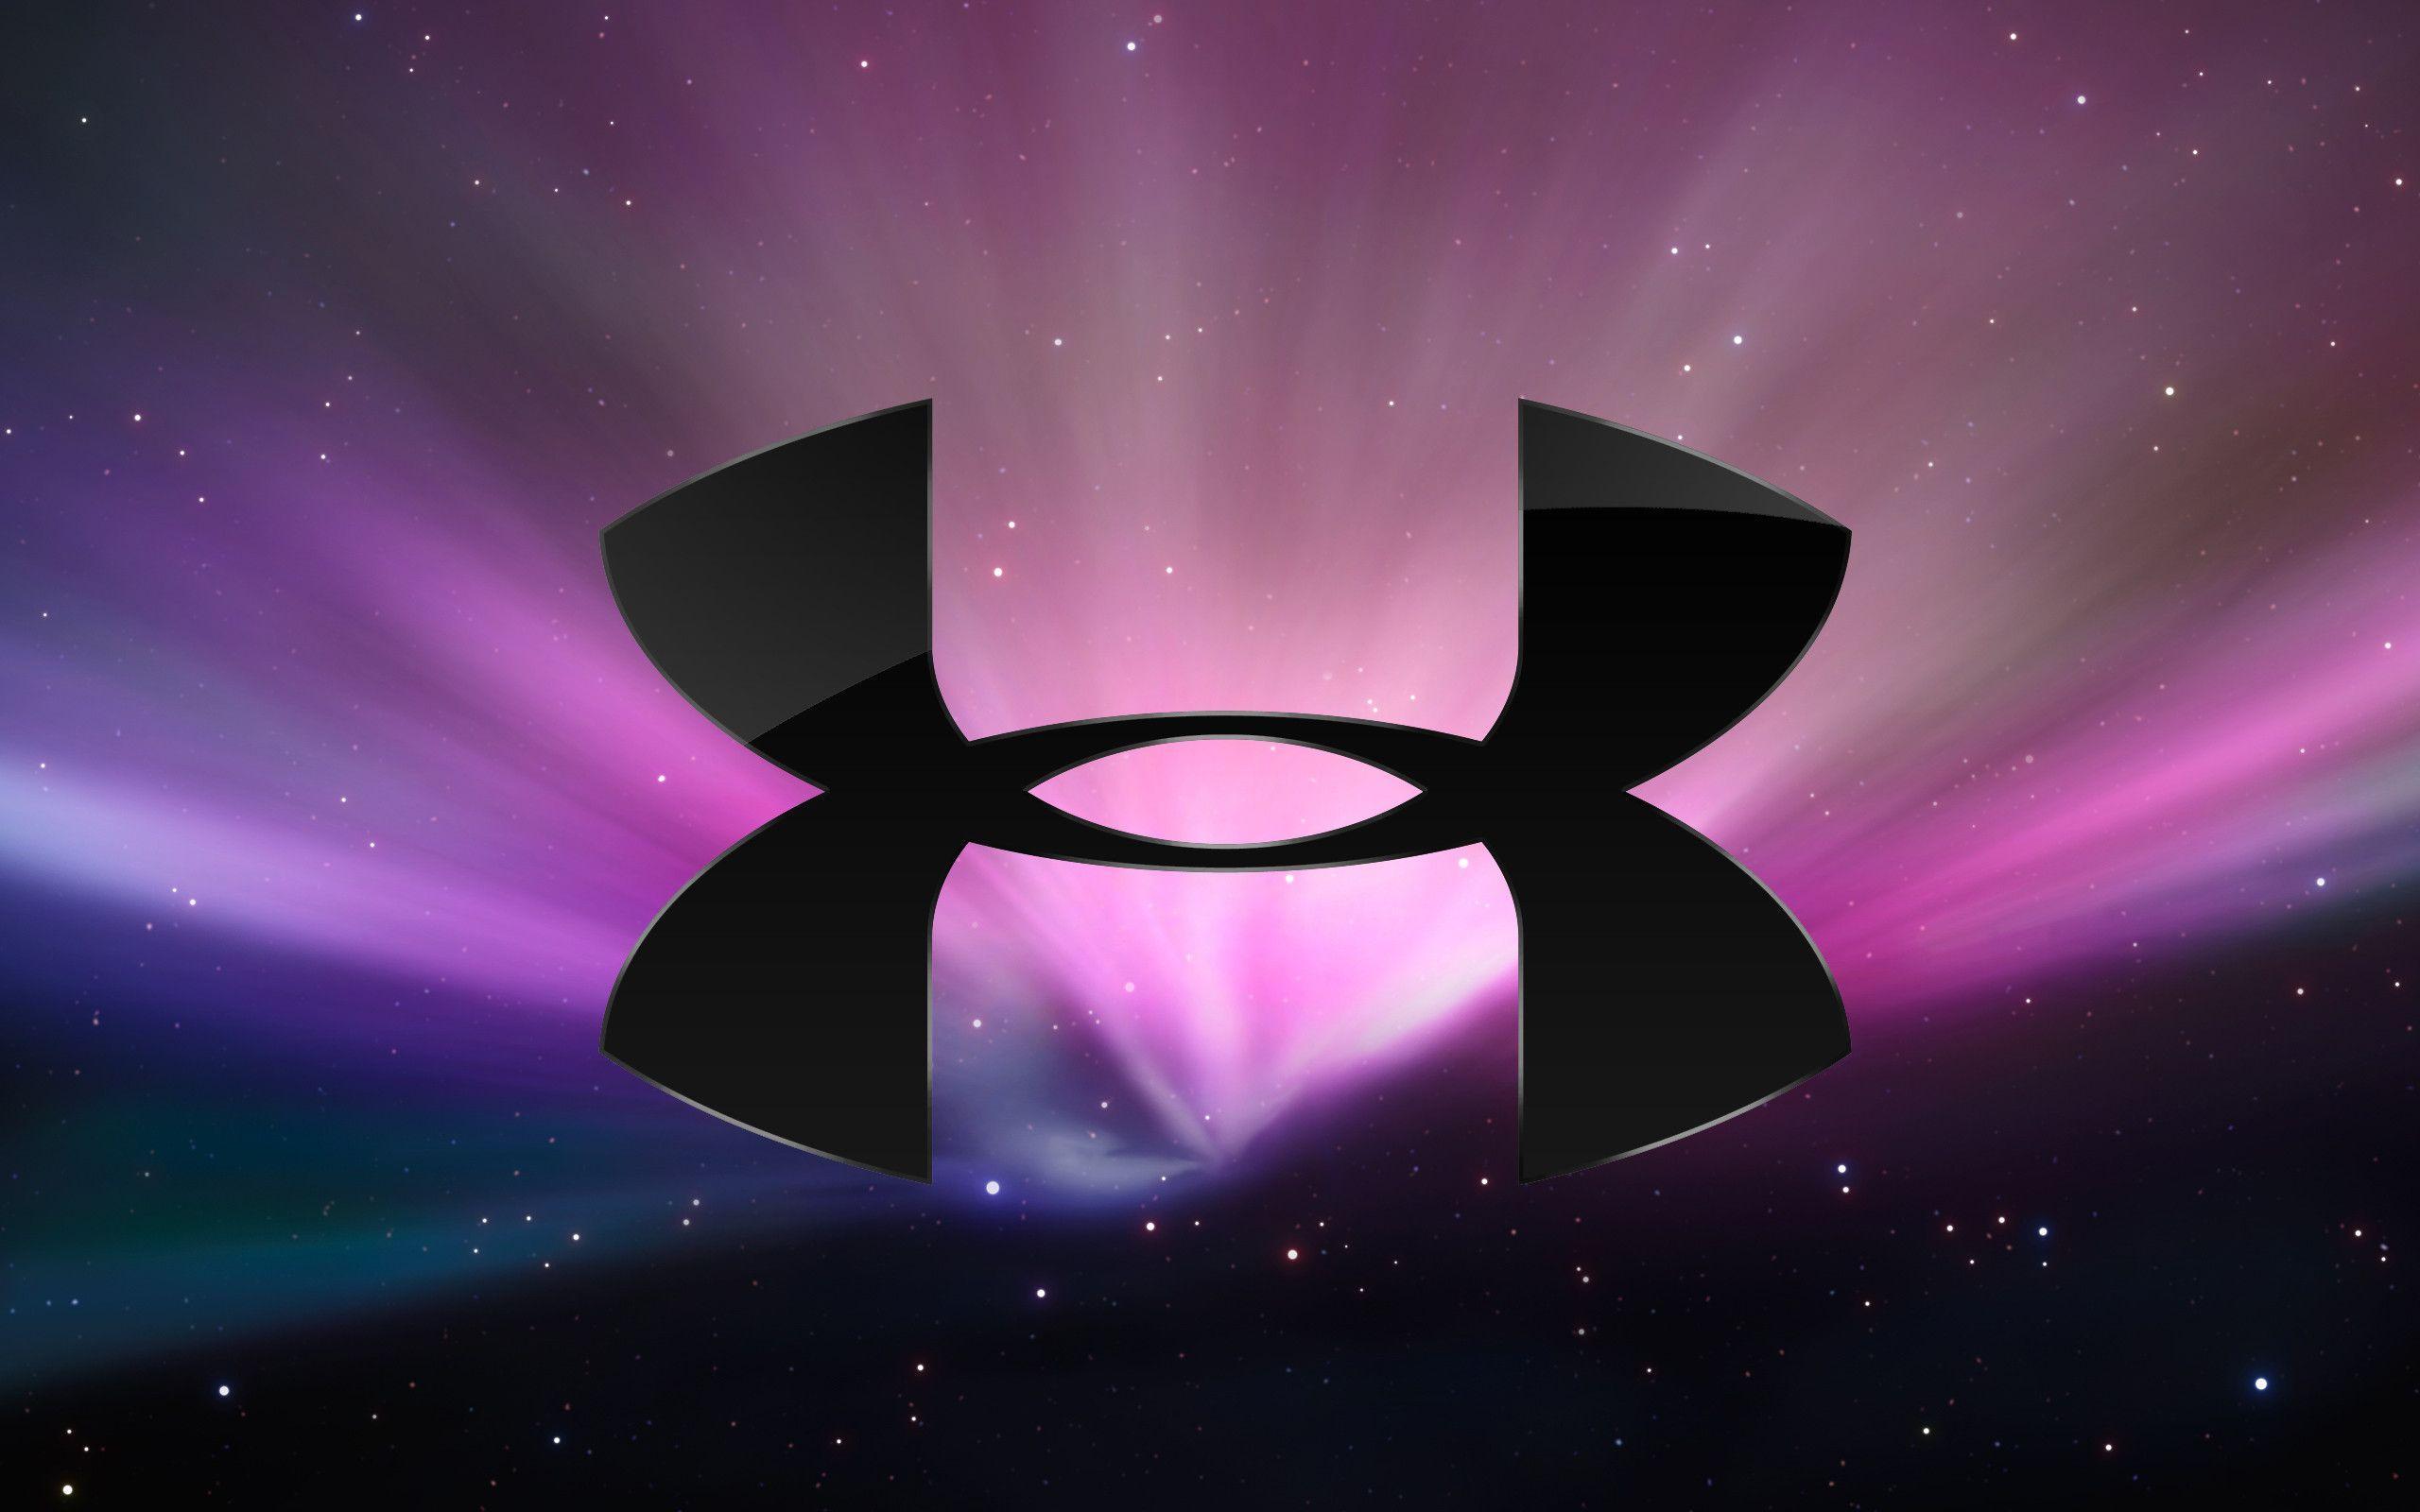 Awesome Under Armour Logo - Cool under armour Logos